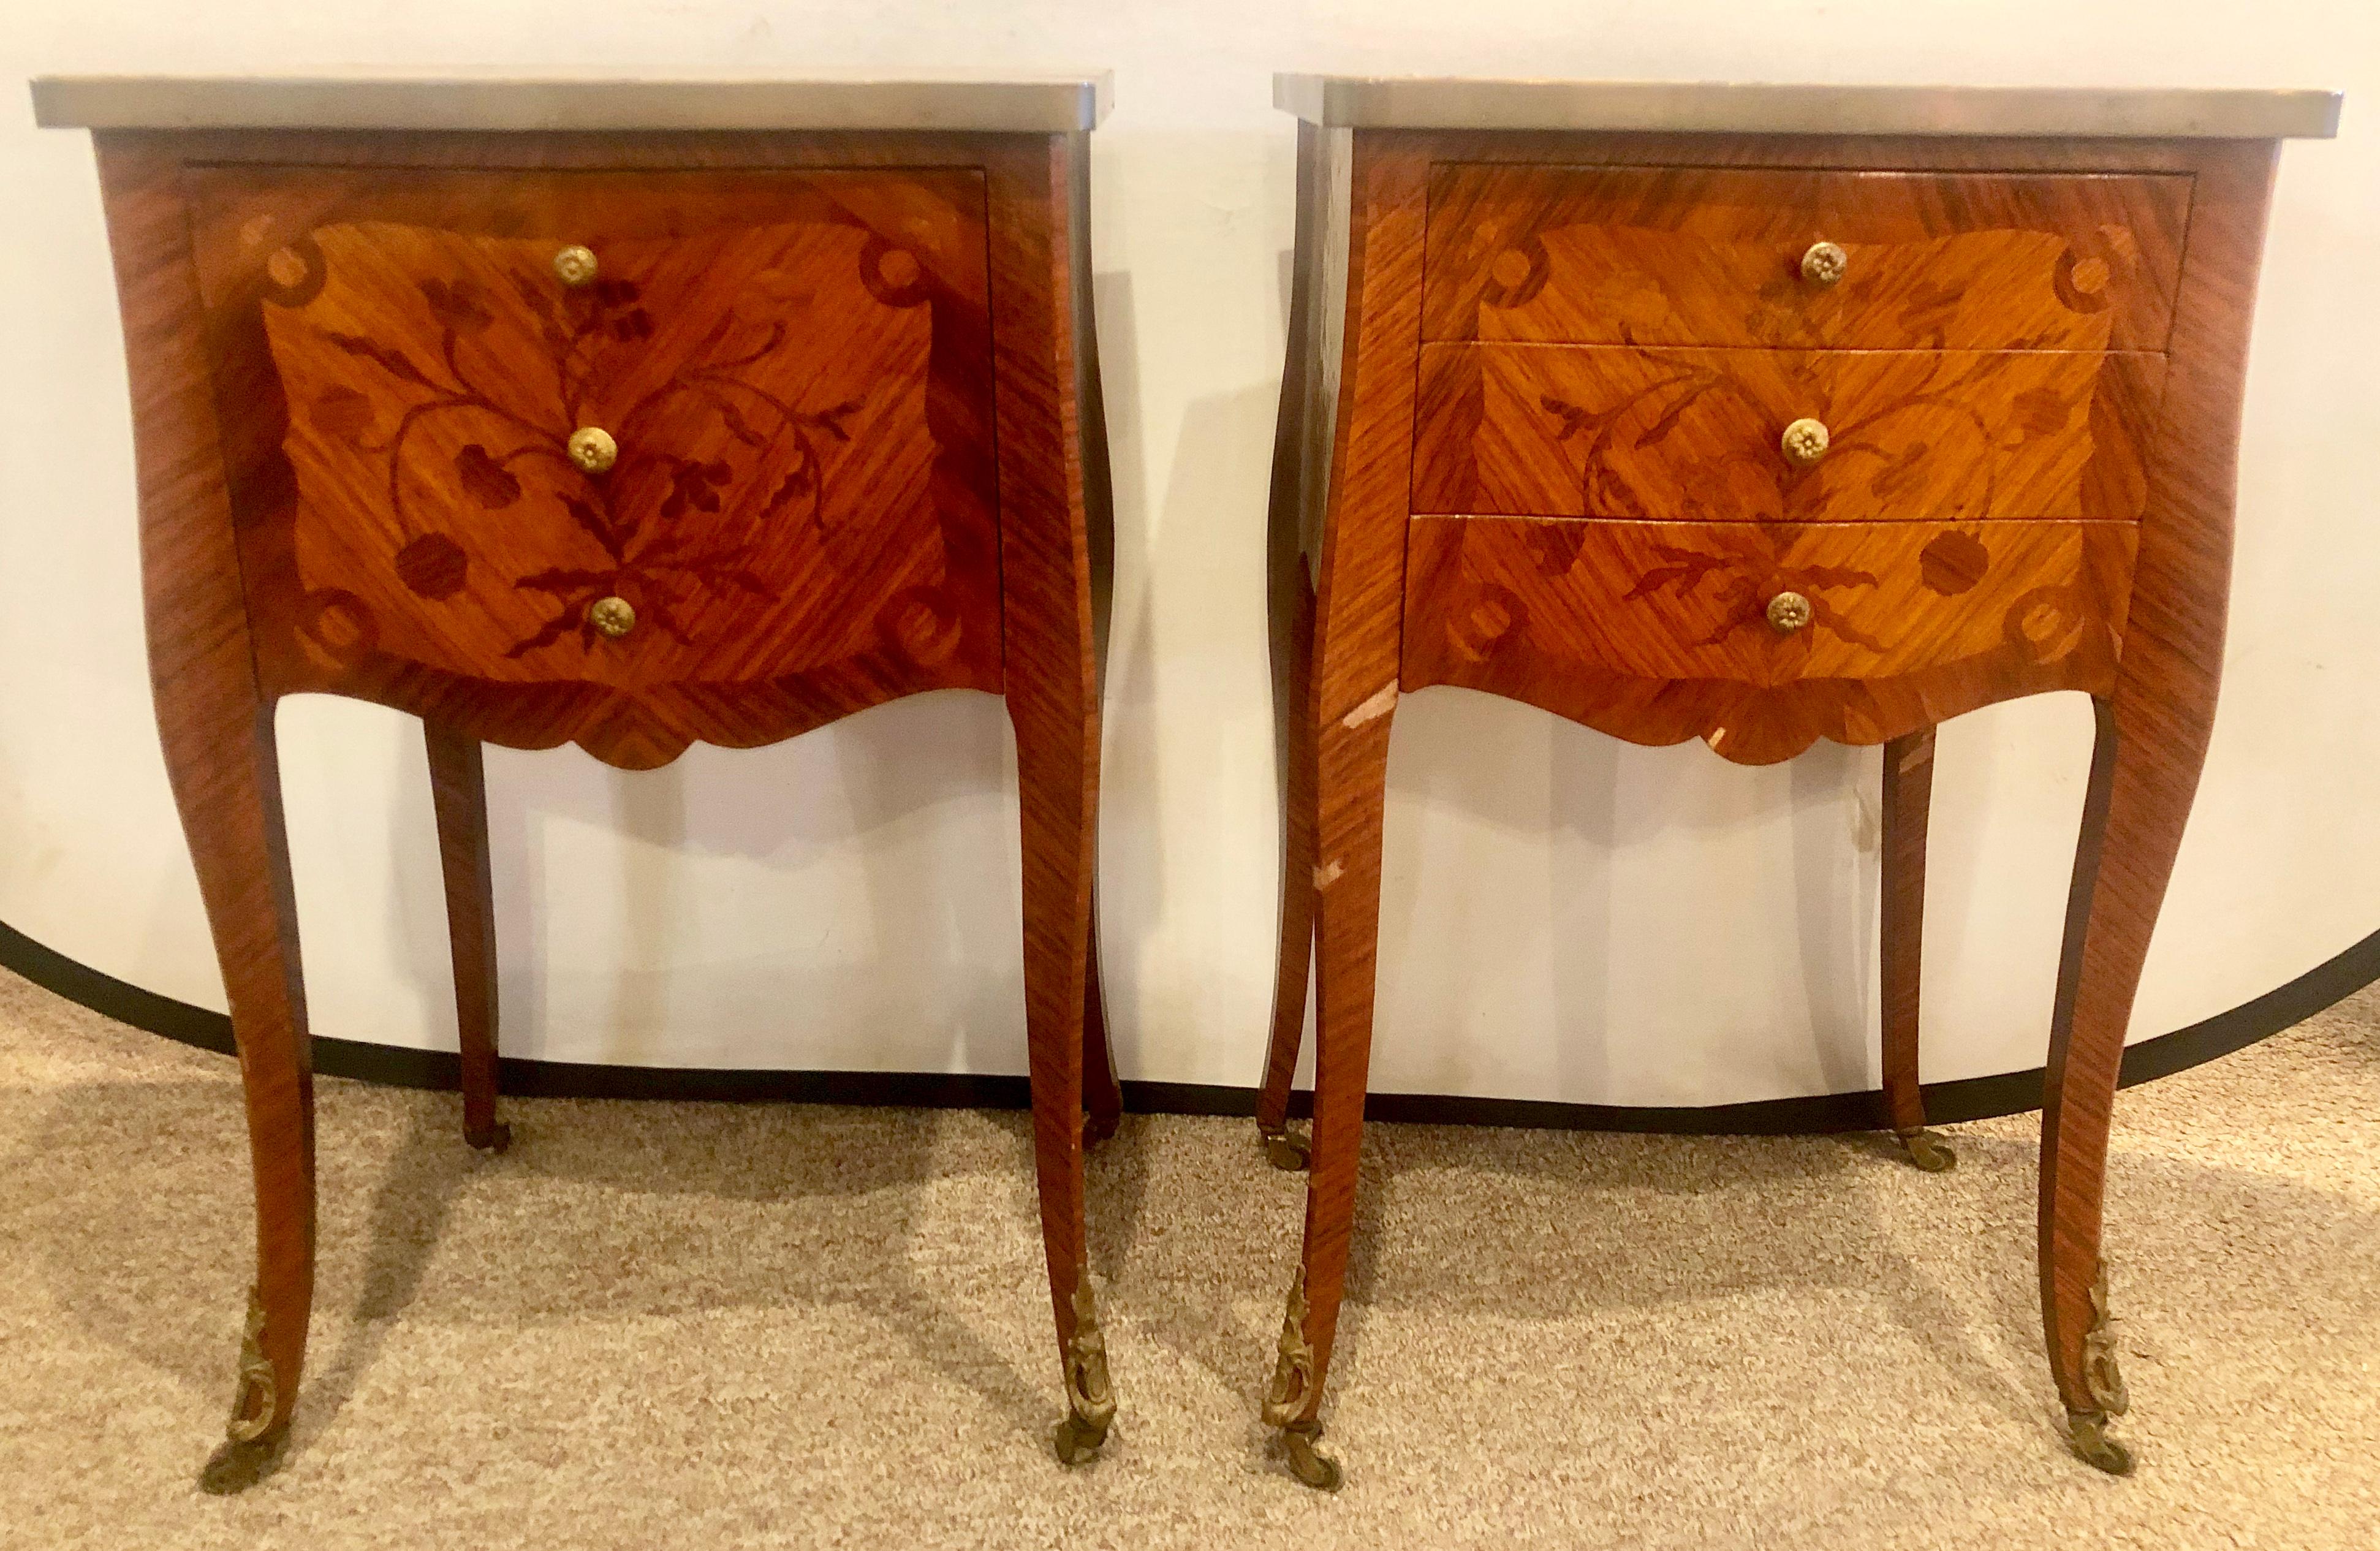 Pair of 1920s French Louis XV style stands, end tables, side tables or night tables one having three drawers the other with a drop front door each having floral inlays supporting bronze galleried marble tops on casters.
Lia.